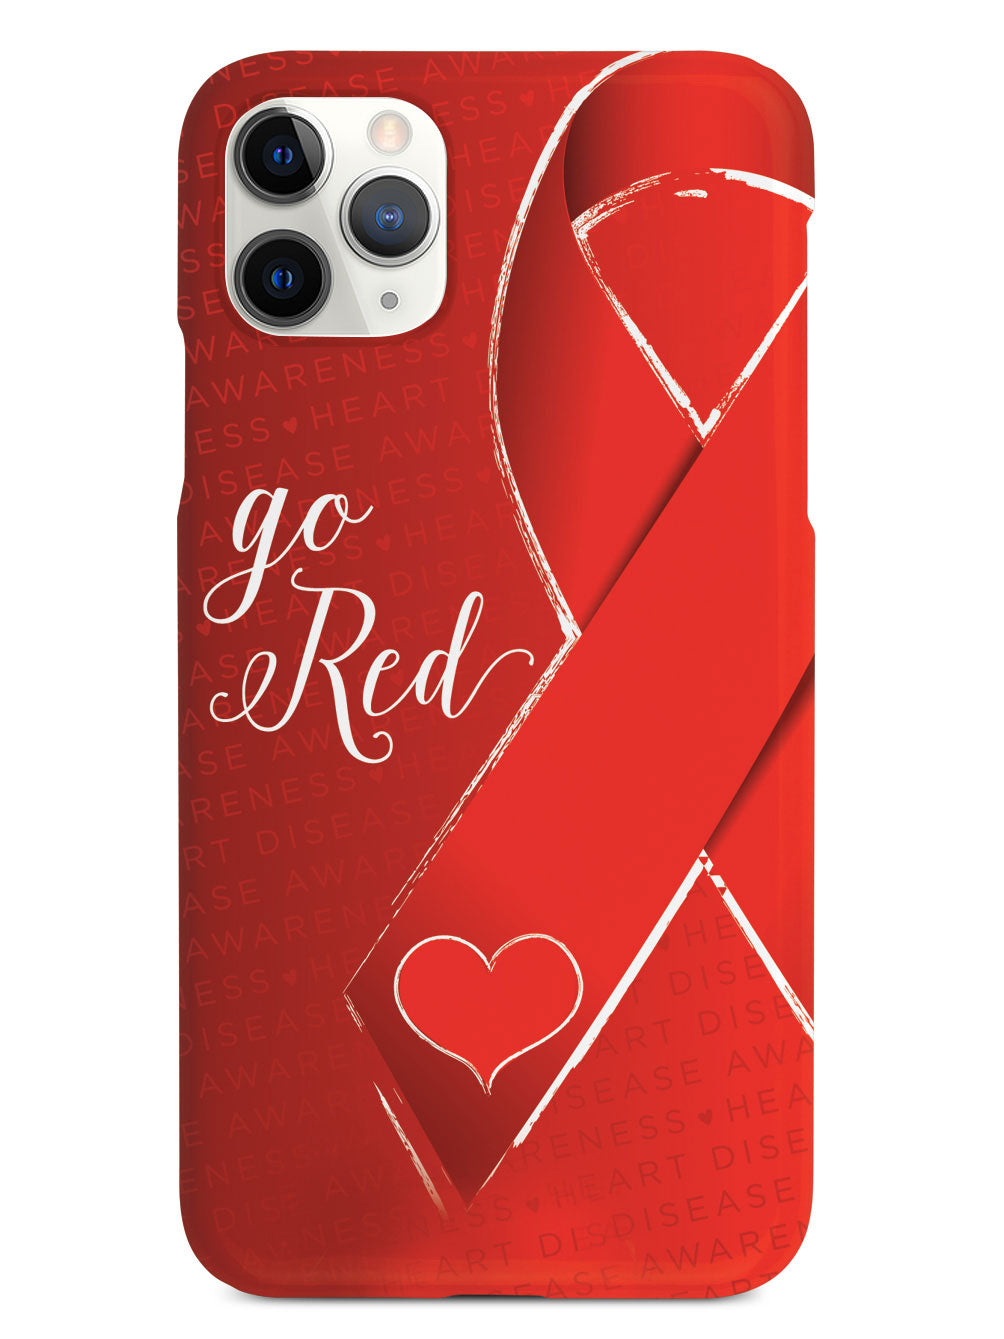 Go Red for Heart Disease Awareness Case